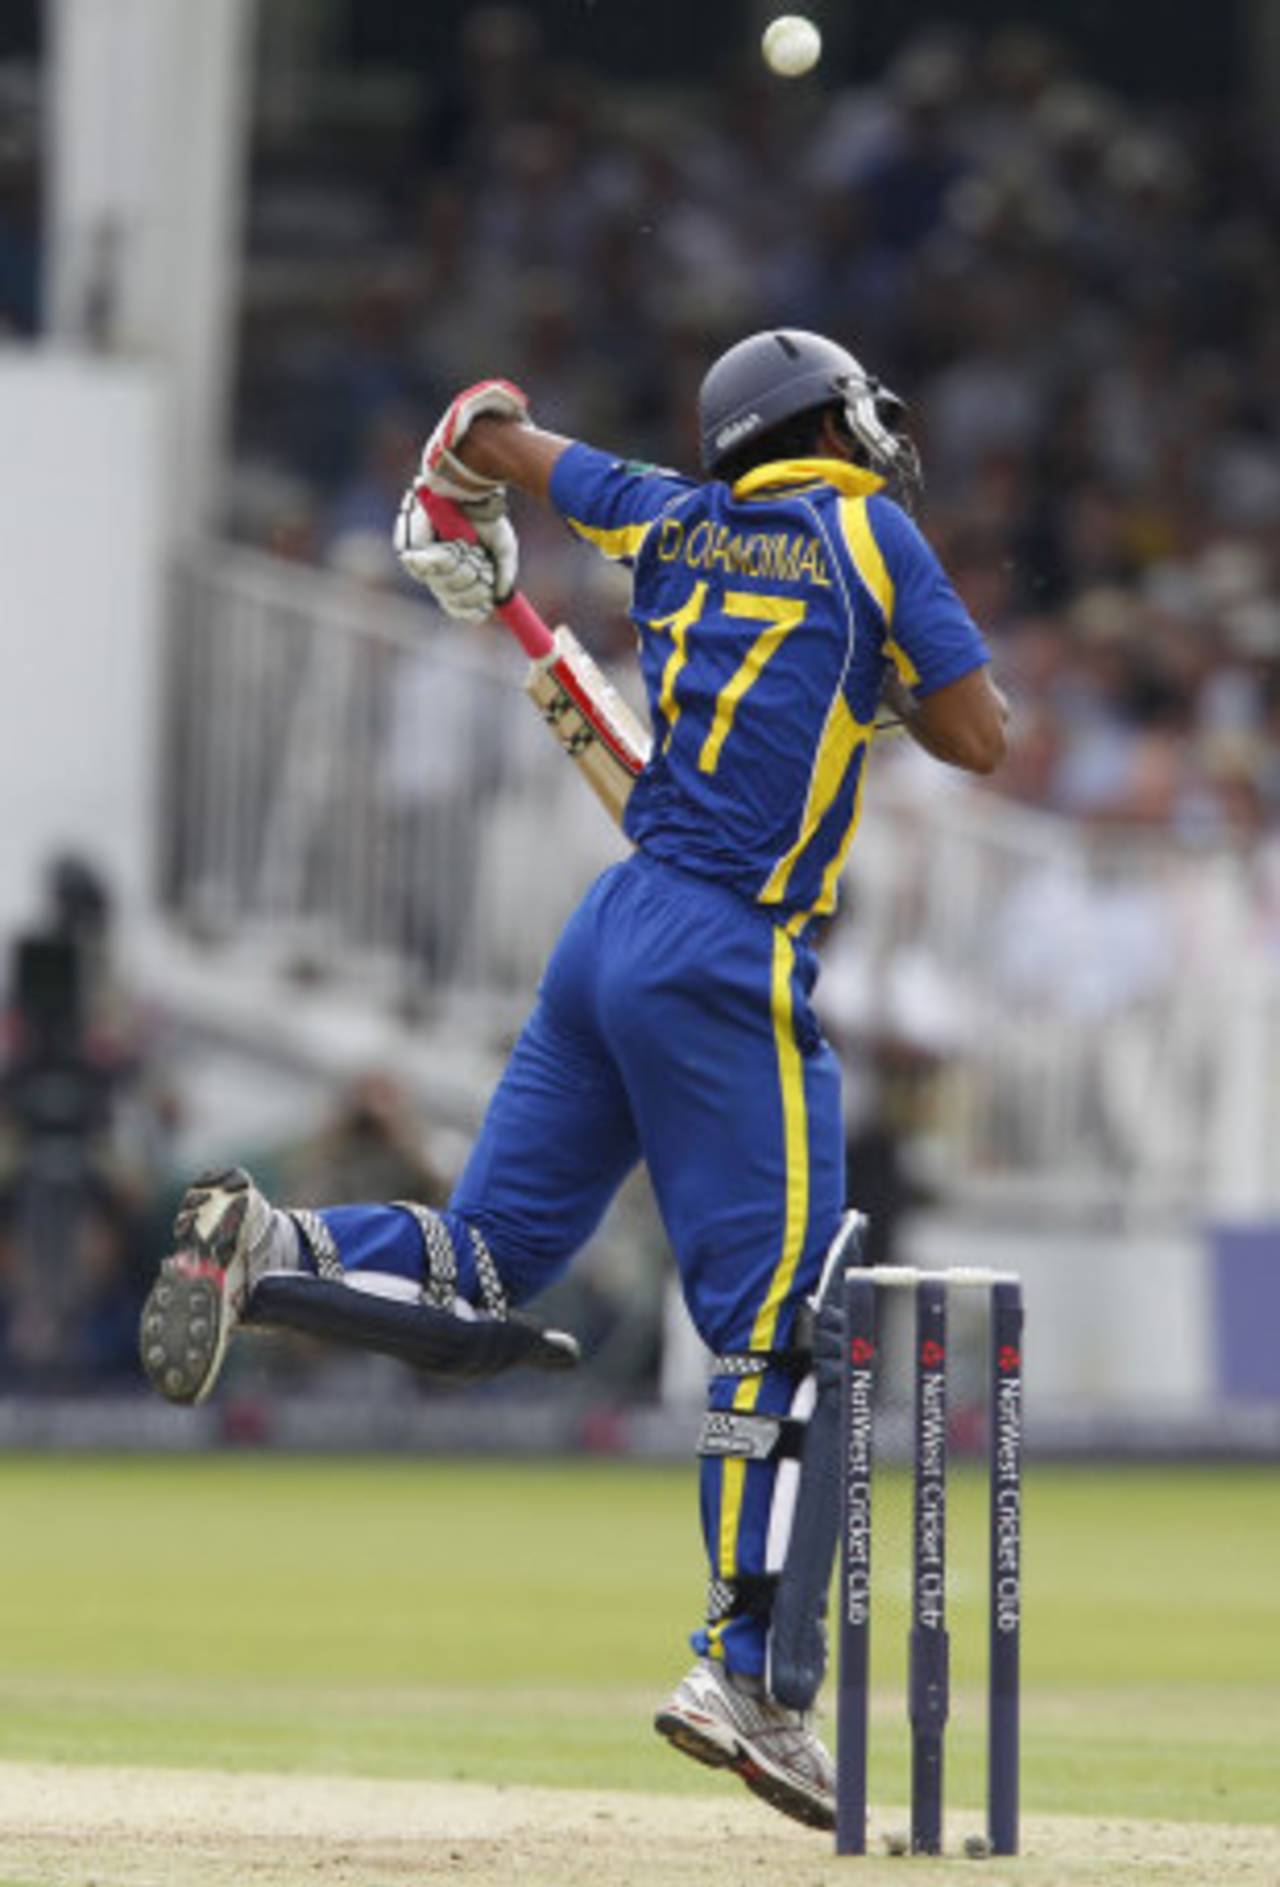 Dinesh Chandimal was made to hop as England moved to a short-pitched attack, England v Sri Lanka, 3rd ODI, Lord's July 3 2011